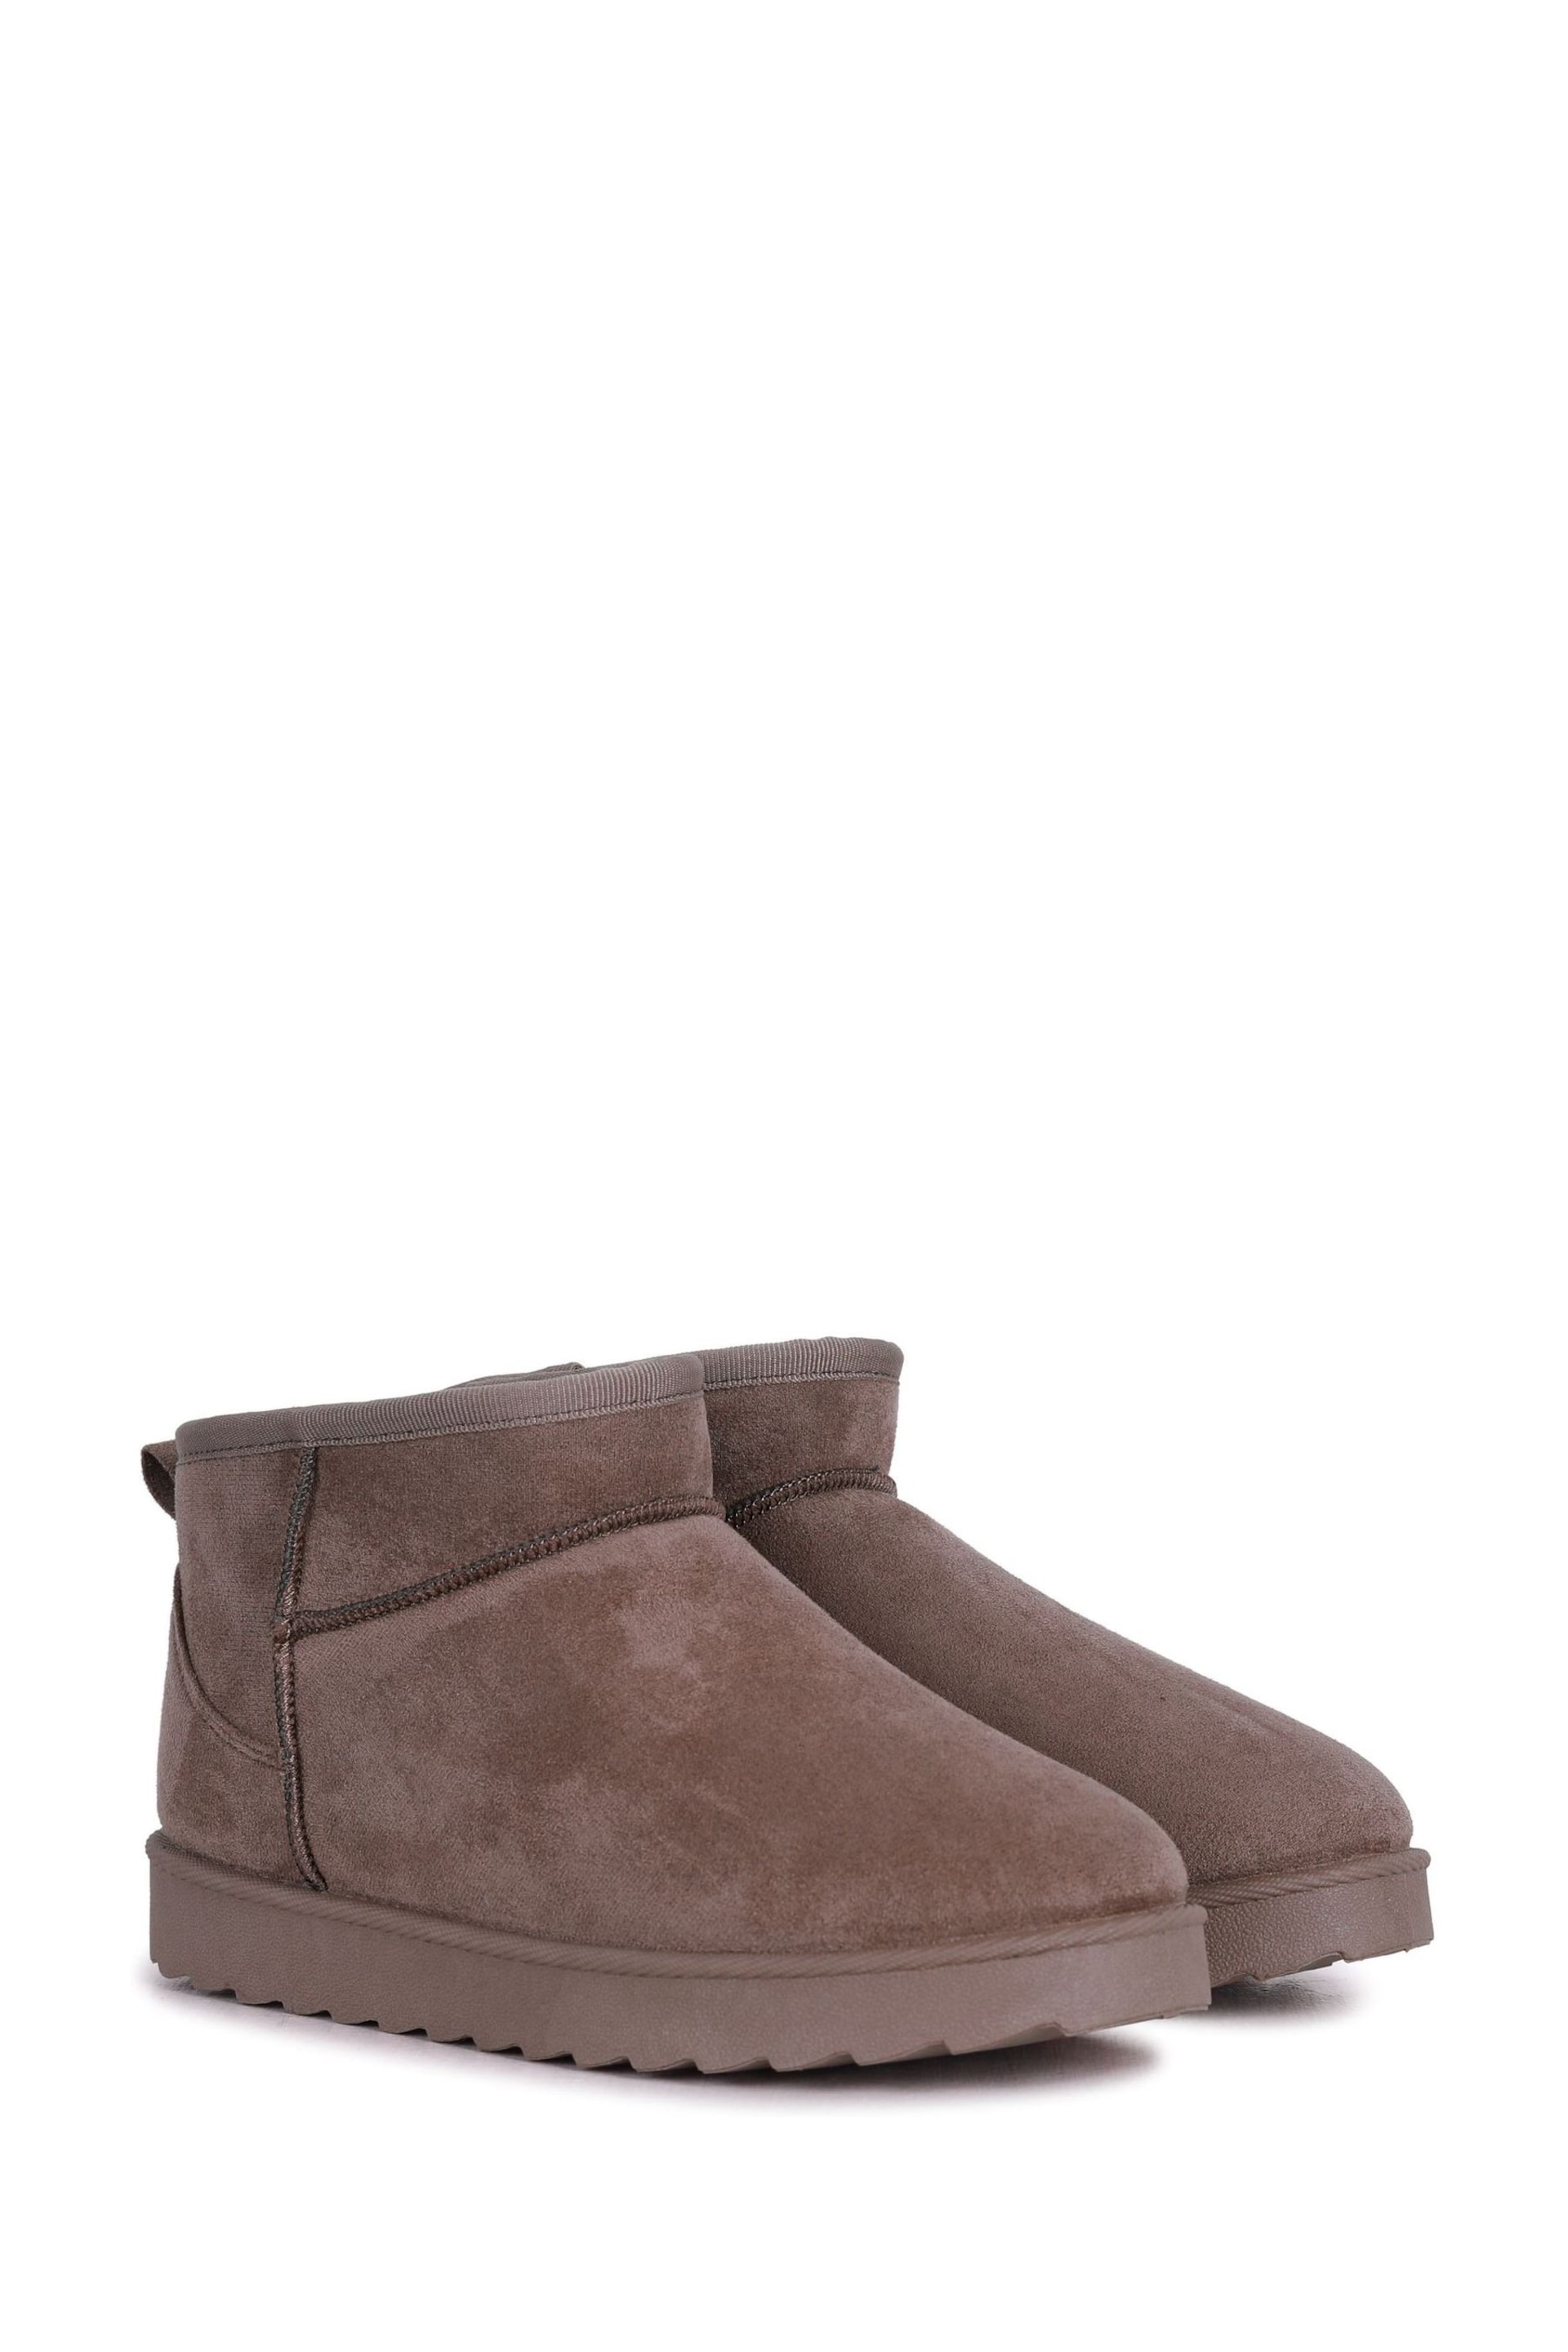 Linzi Mocha Brown Mini Addy Faux Suede Faux Fur Lined Ankle Boots - Image 3 of 4